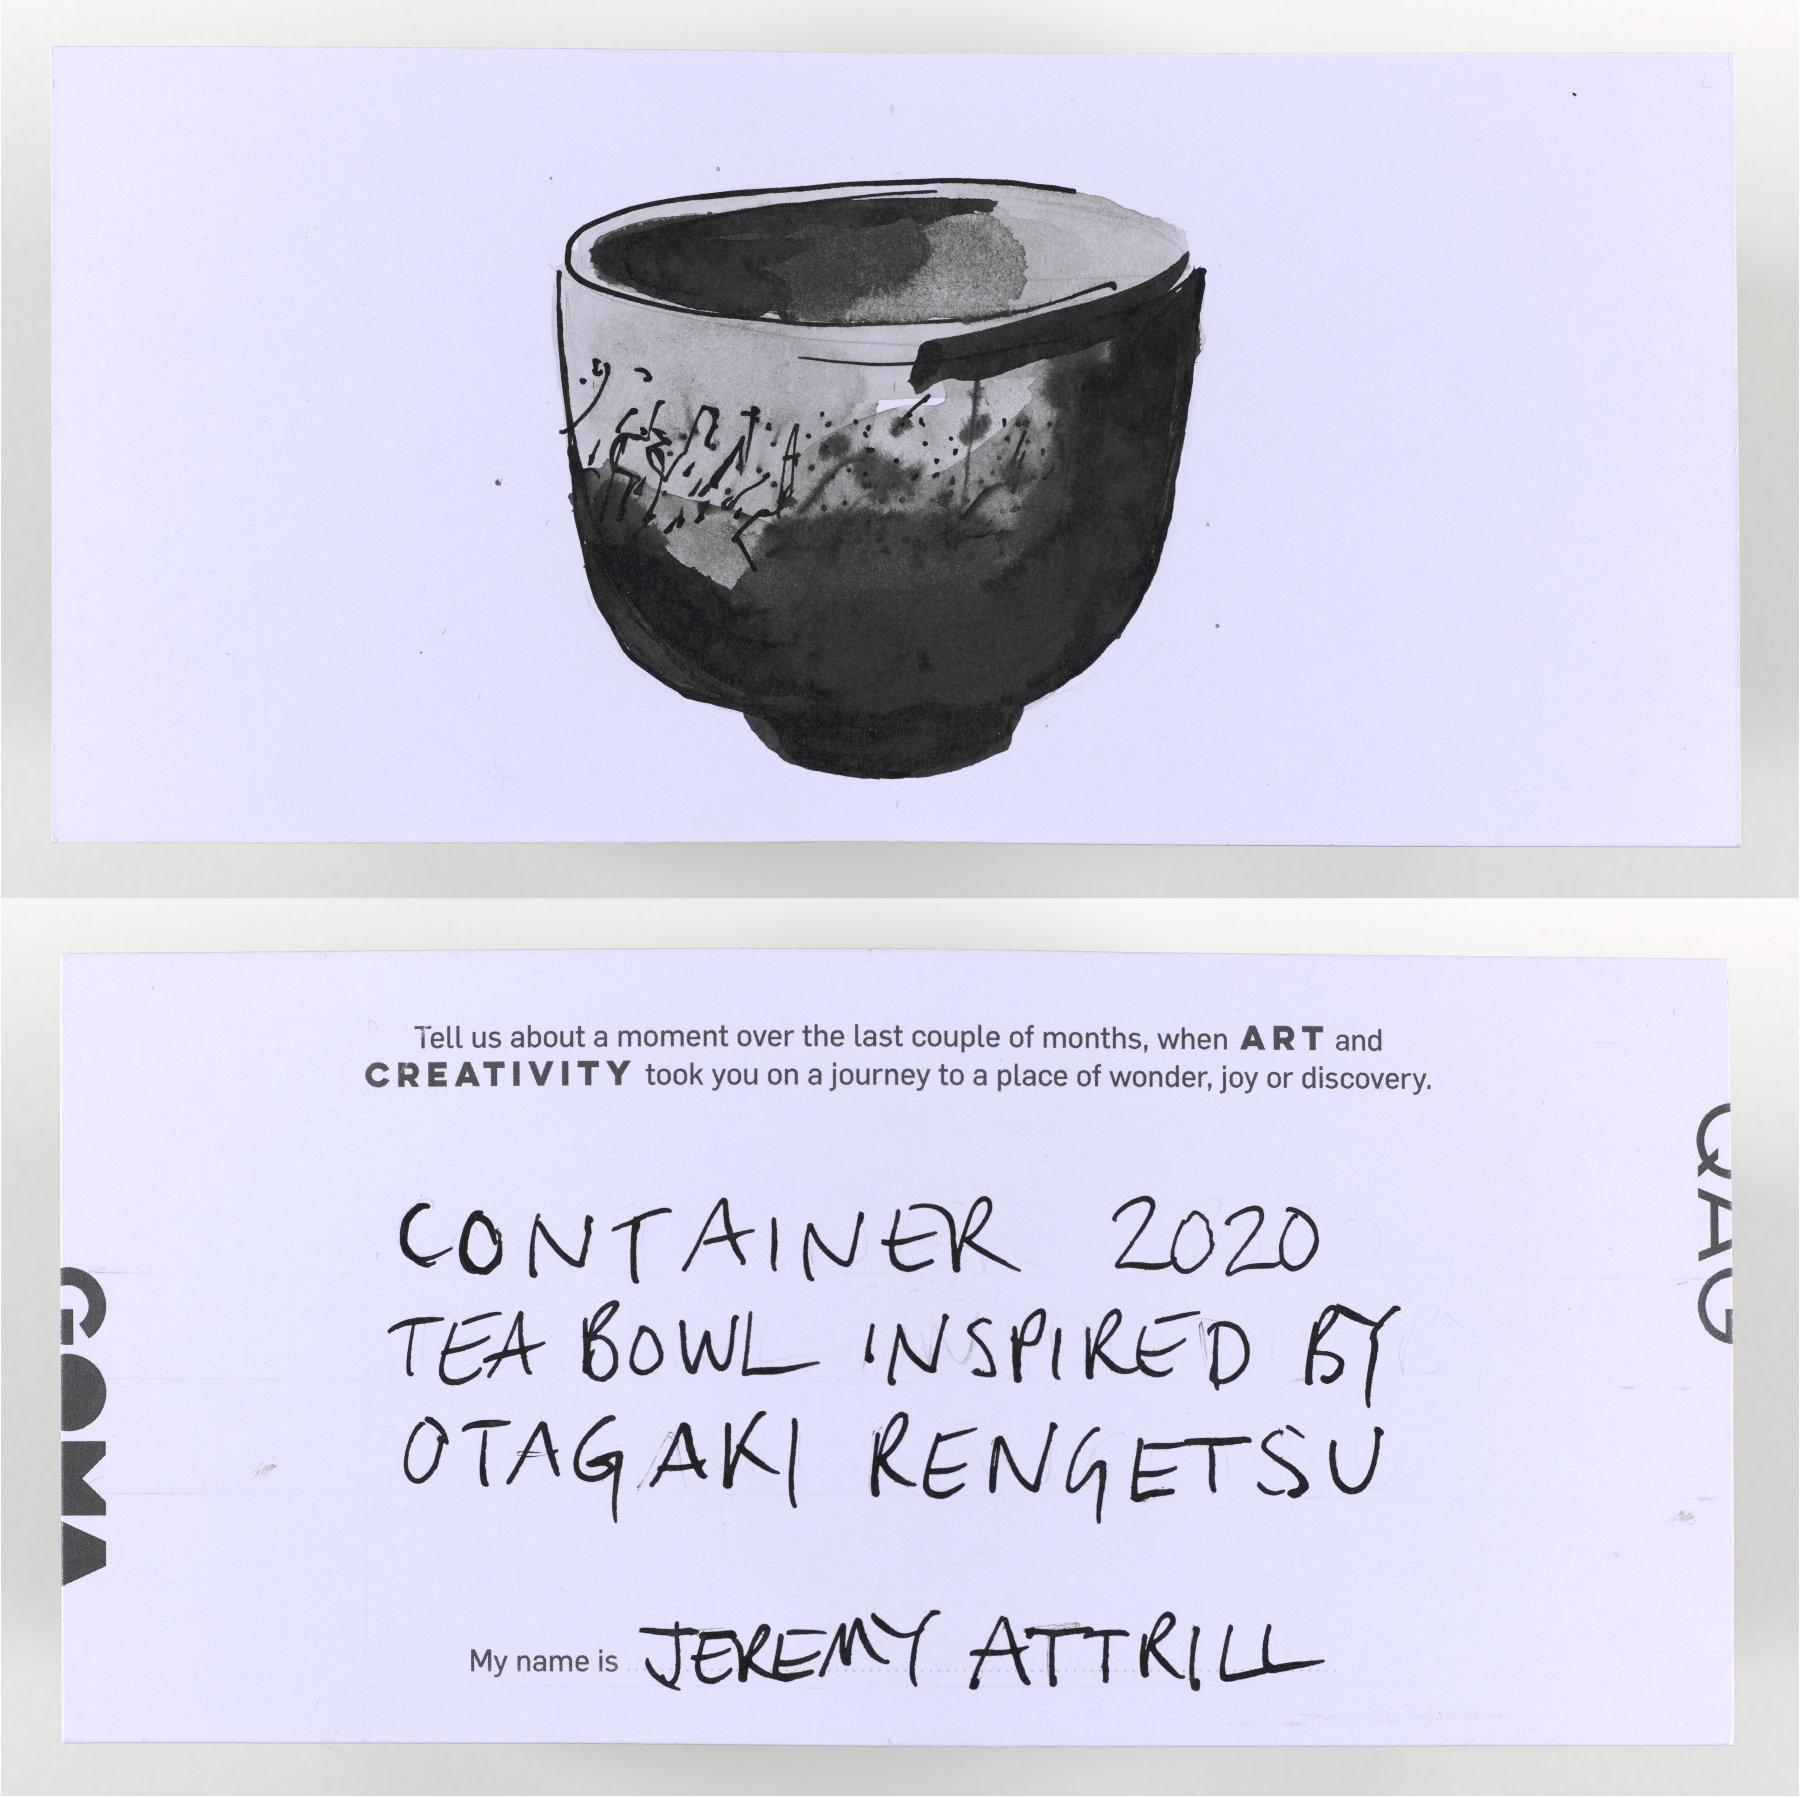 Generated image of the artwork: Jeremy Attrill